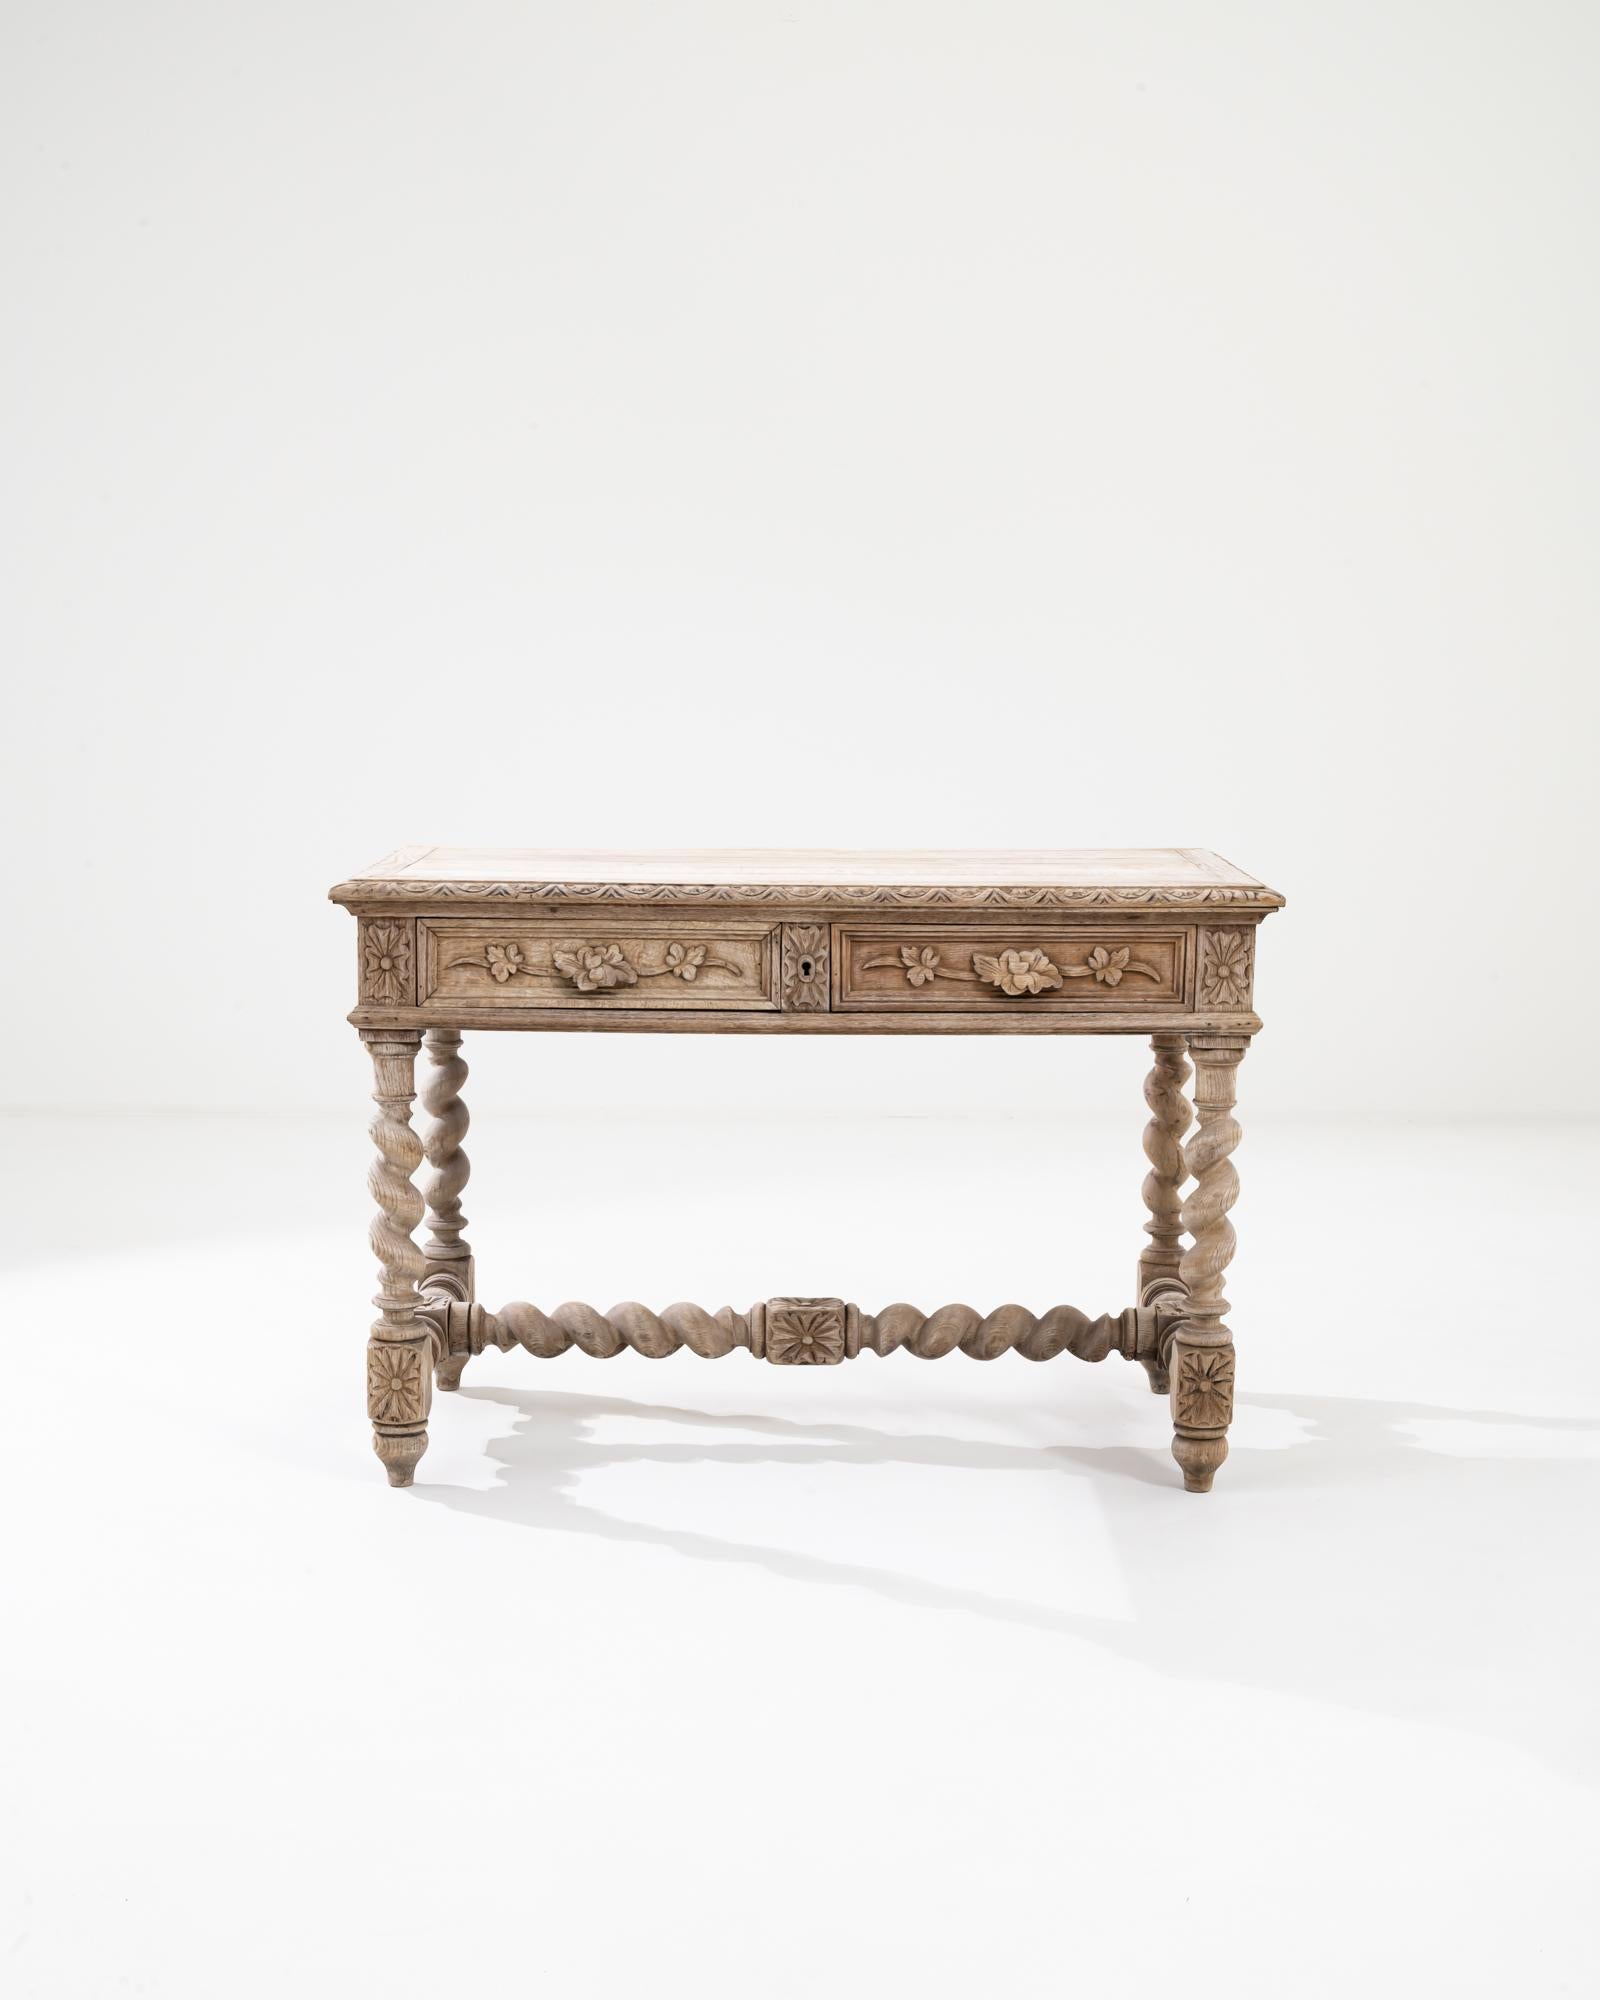 A wooden side table from 19th century Belgium, made in the Flemish style. Fit with spiraling legs and lavishly carved details, this side table is brimming with unique character. The floral patterning inscribed along its aprons has been exquisitely